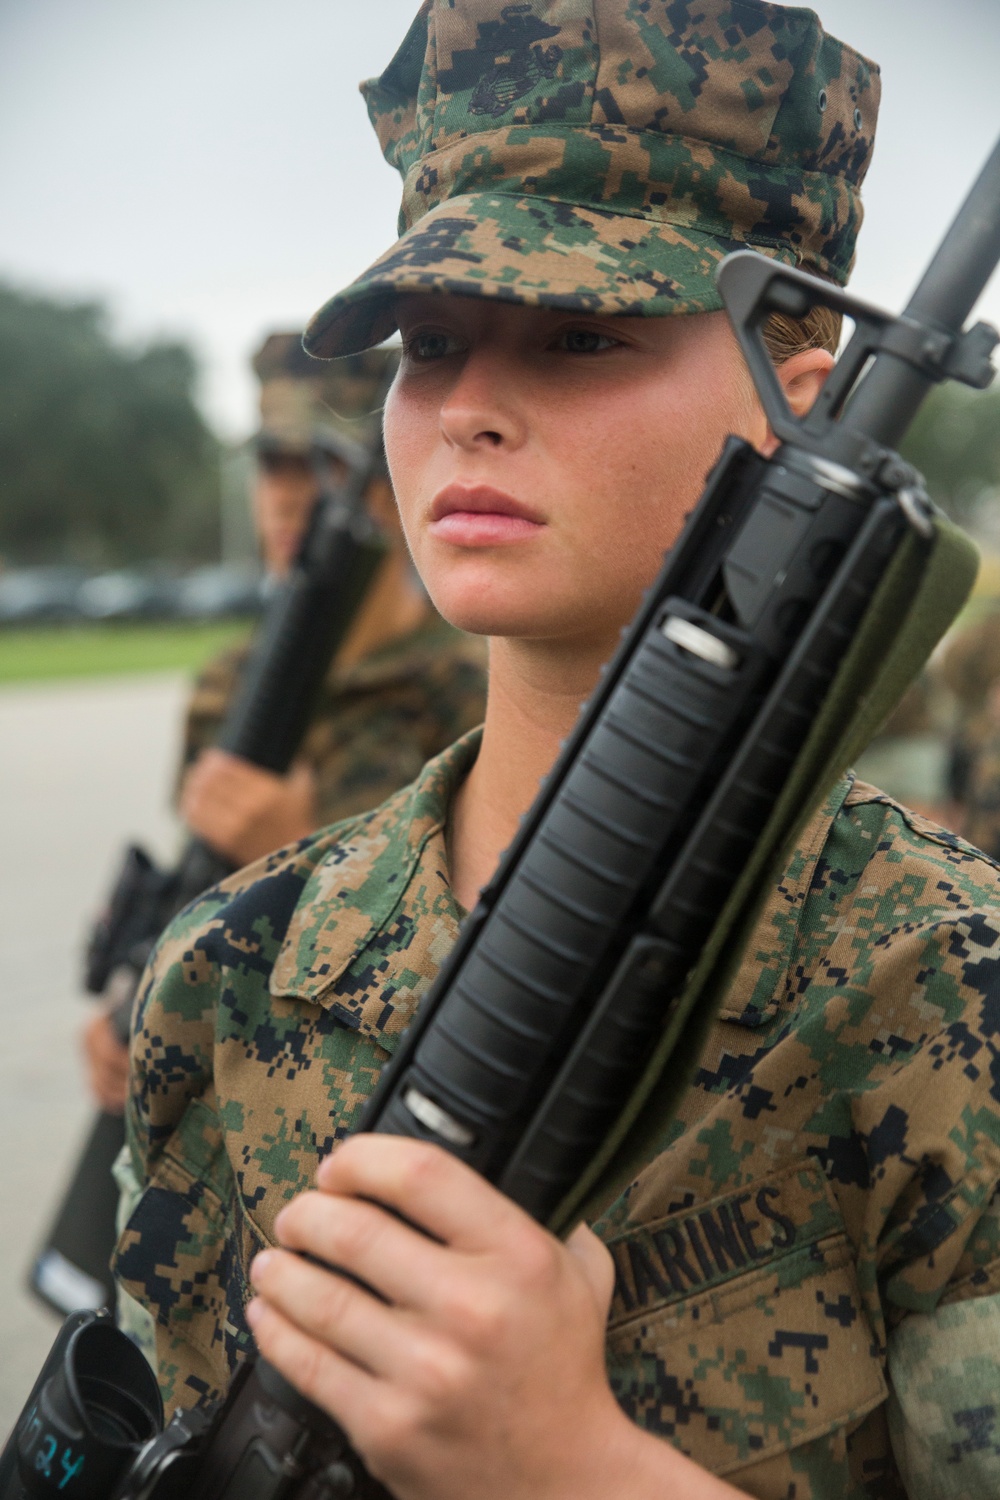 Erlanger, Ky., native training at Parris Island to become U.S. Marine